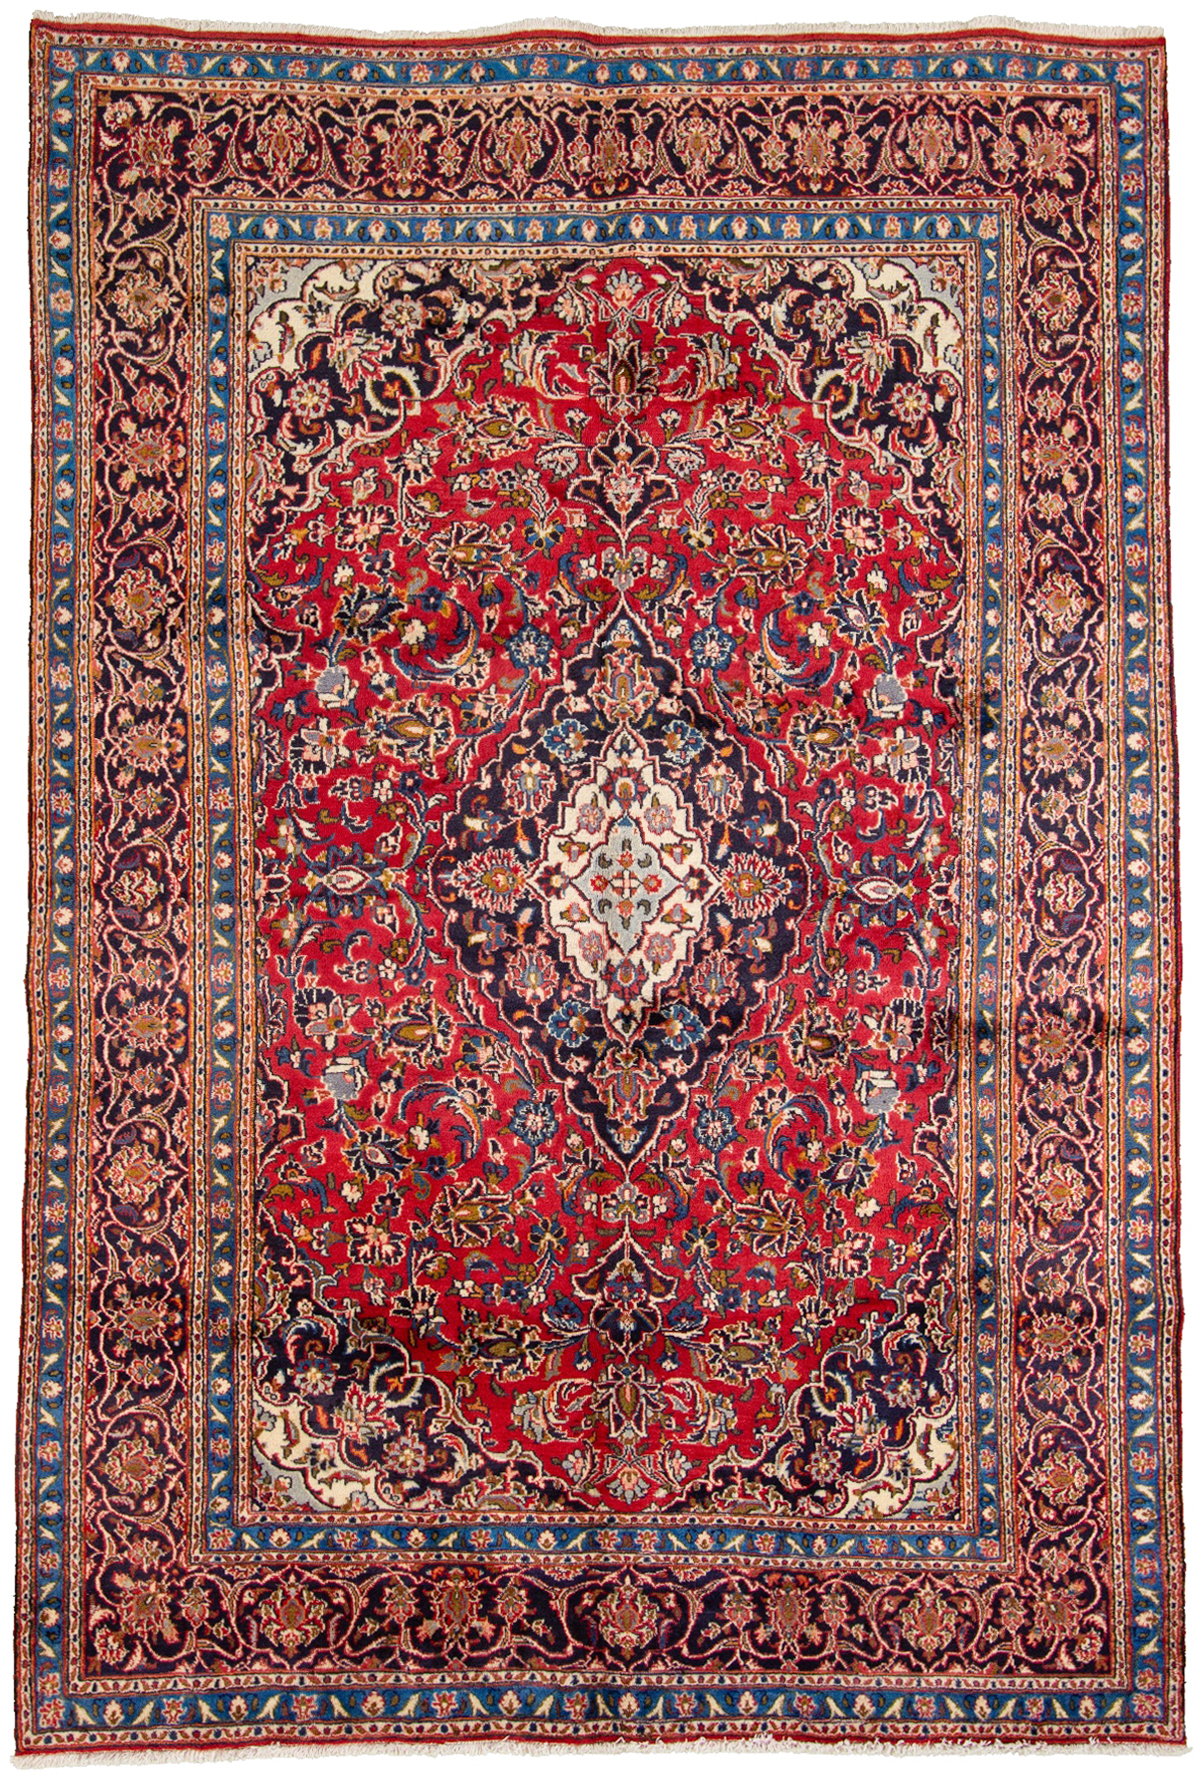 Hand-knotted Mashad  Wool Rug 6'6" x 9'9"  Size: 6'6" x 9'9"  